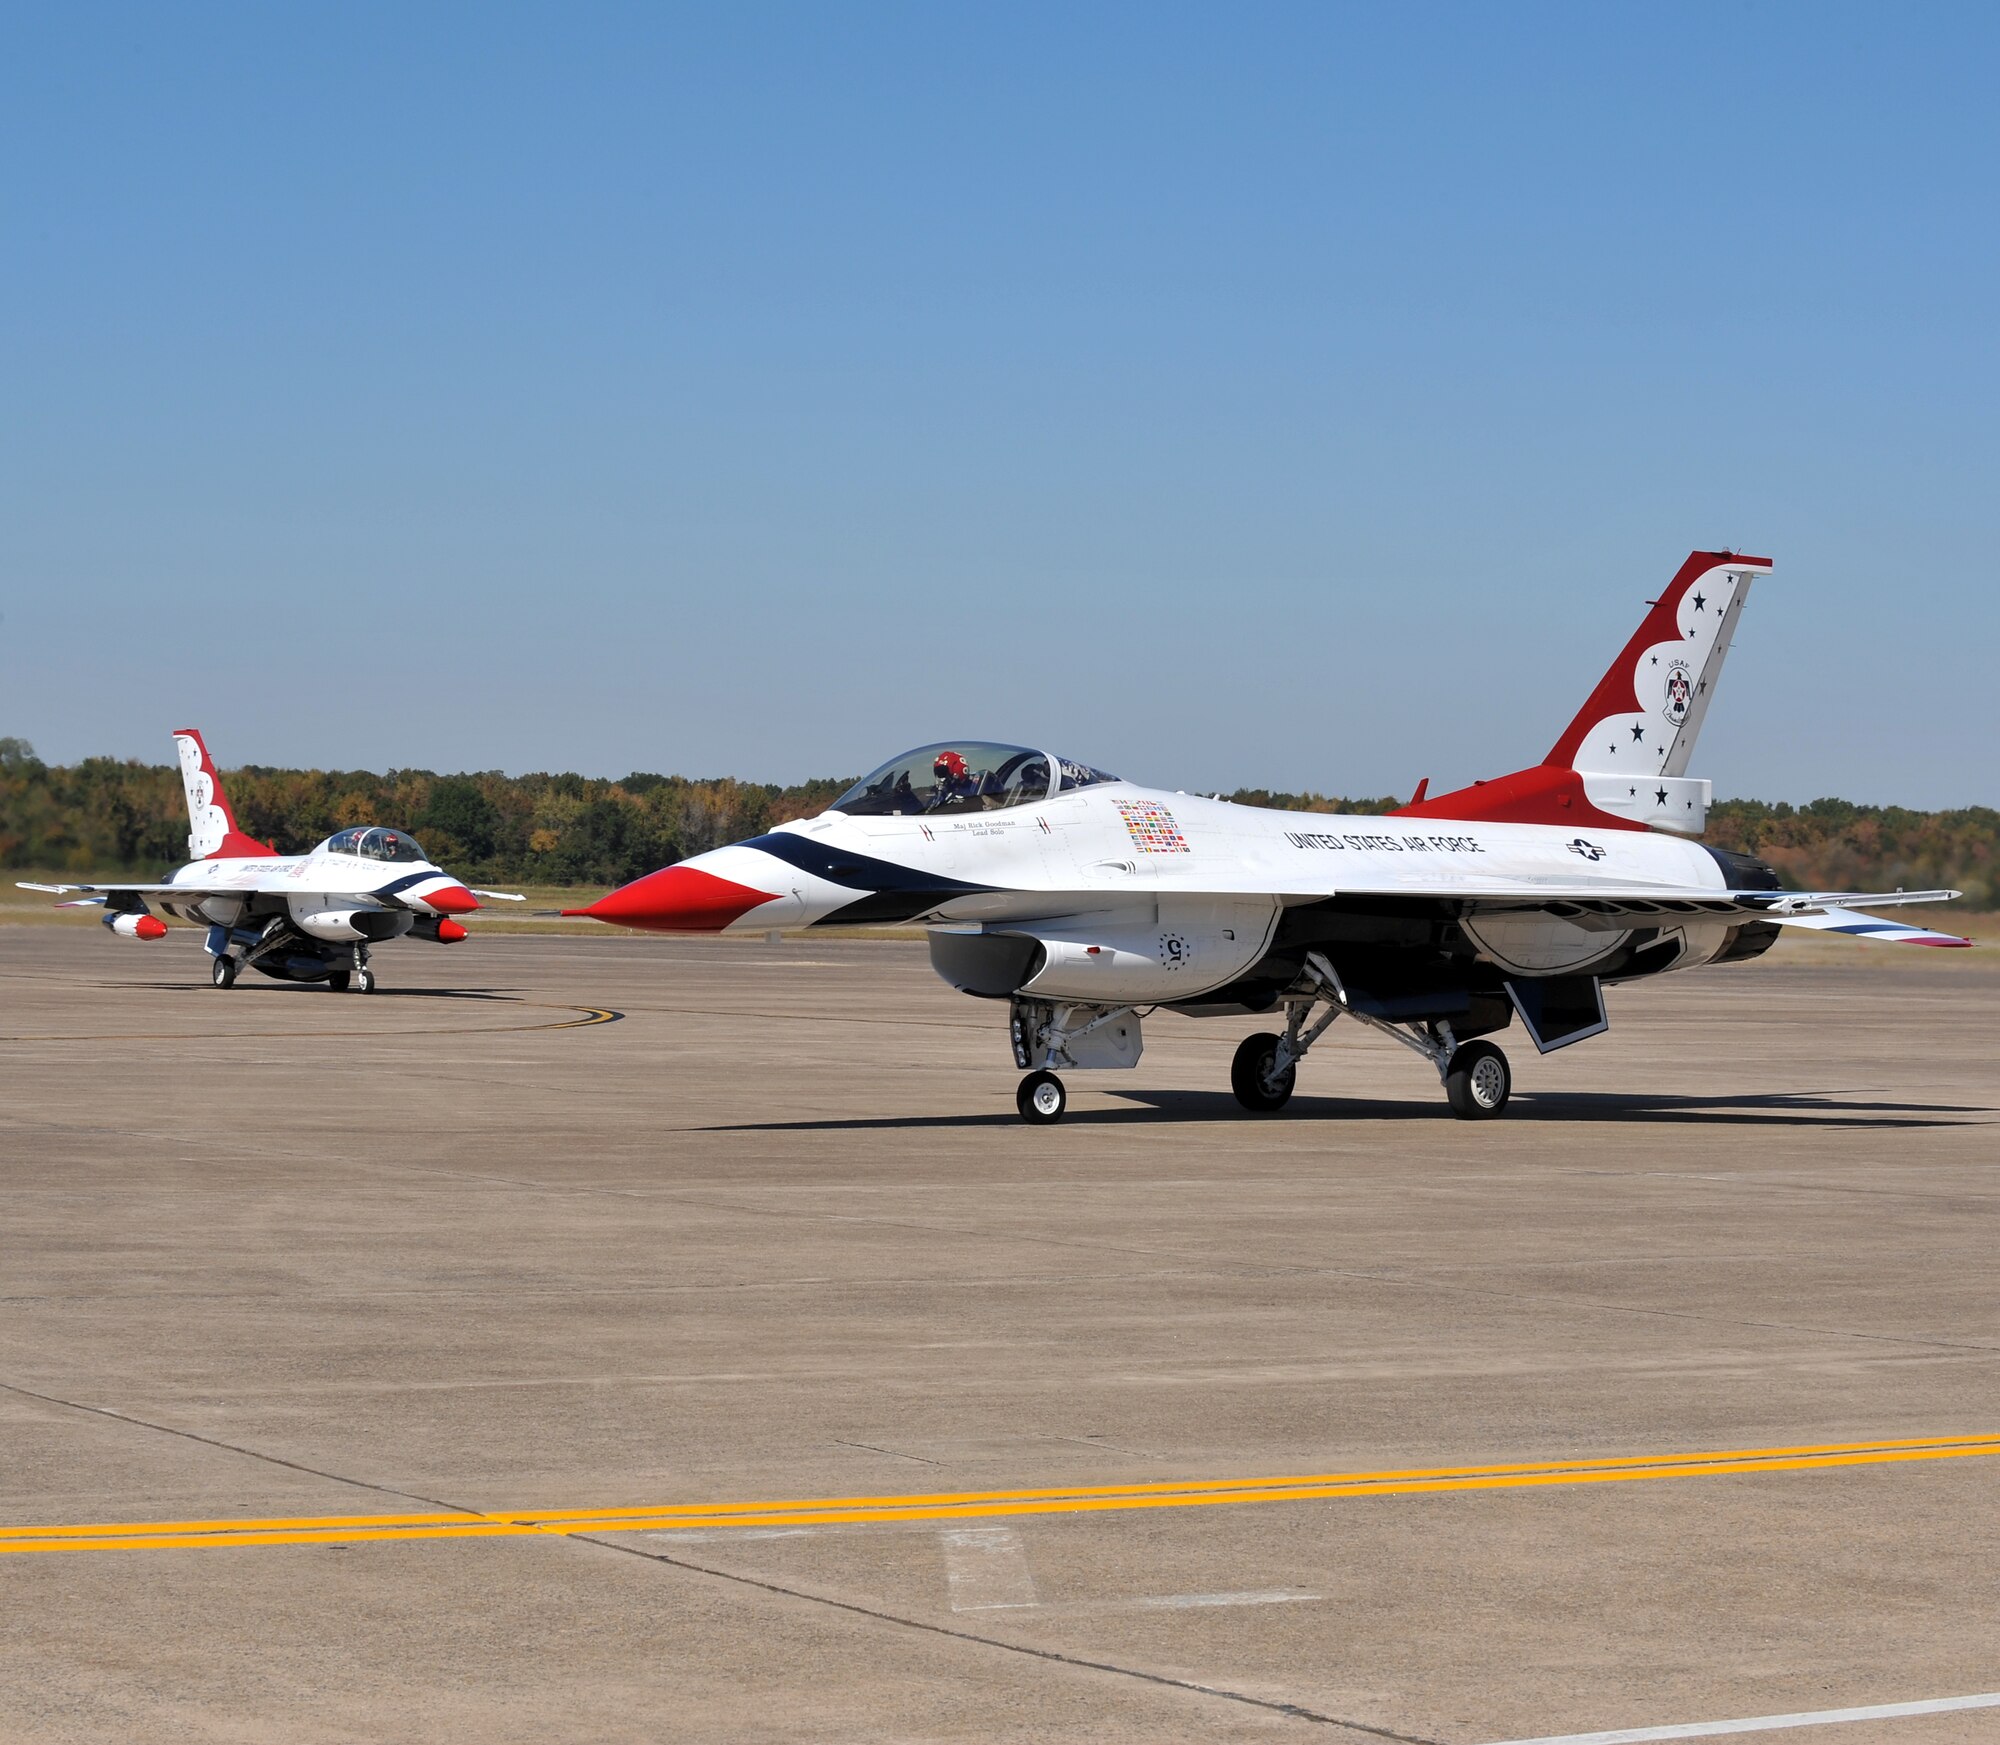 Maj. Rick Goodman, No. 5, and Capt. Kristin Hubbard, No. 8, both members of the Air Force Thunderbirds F-16 demonstration team, taxi in on the base runway Oct. 6. The Air Force Thunderbirds F-16 demonstration team is headlining the base’s air show Oct. 9-10.  (U.S. Air Force photo by Staff Sgt. Chris Willis)